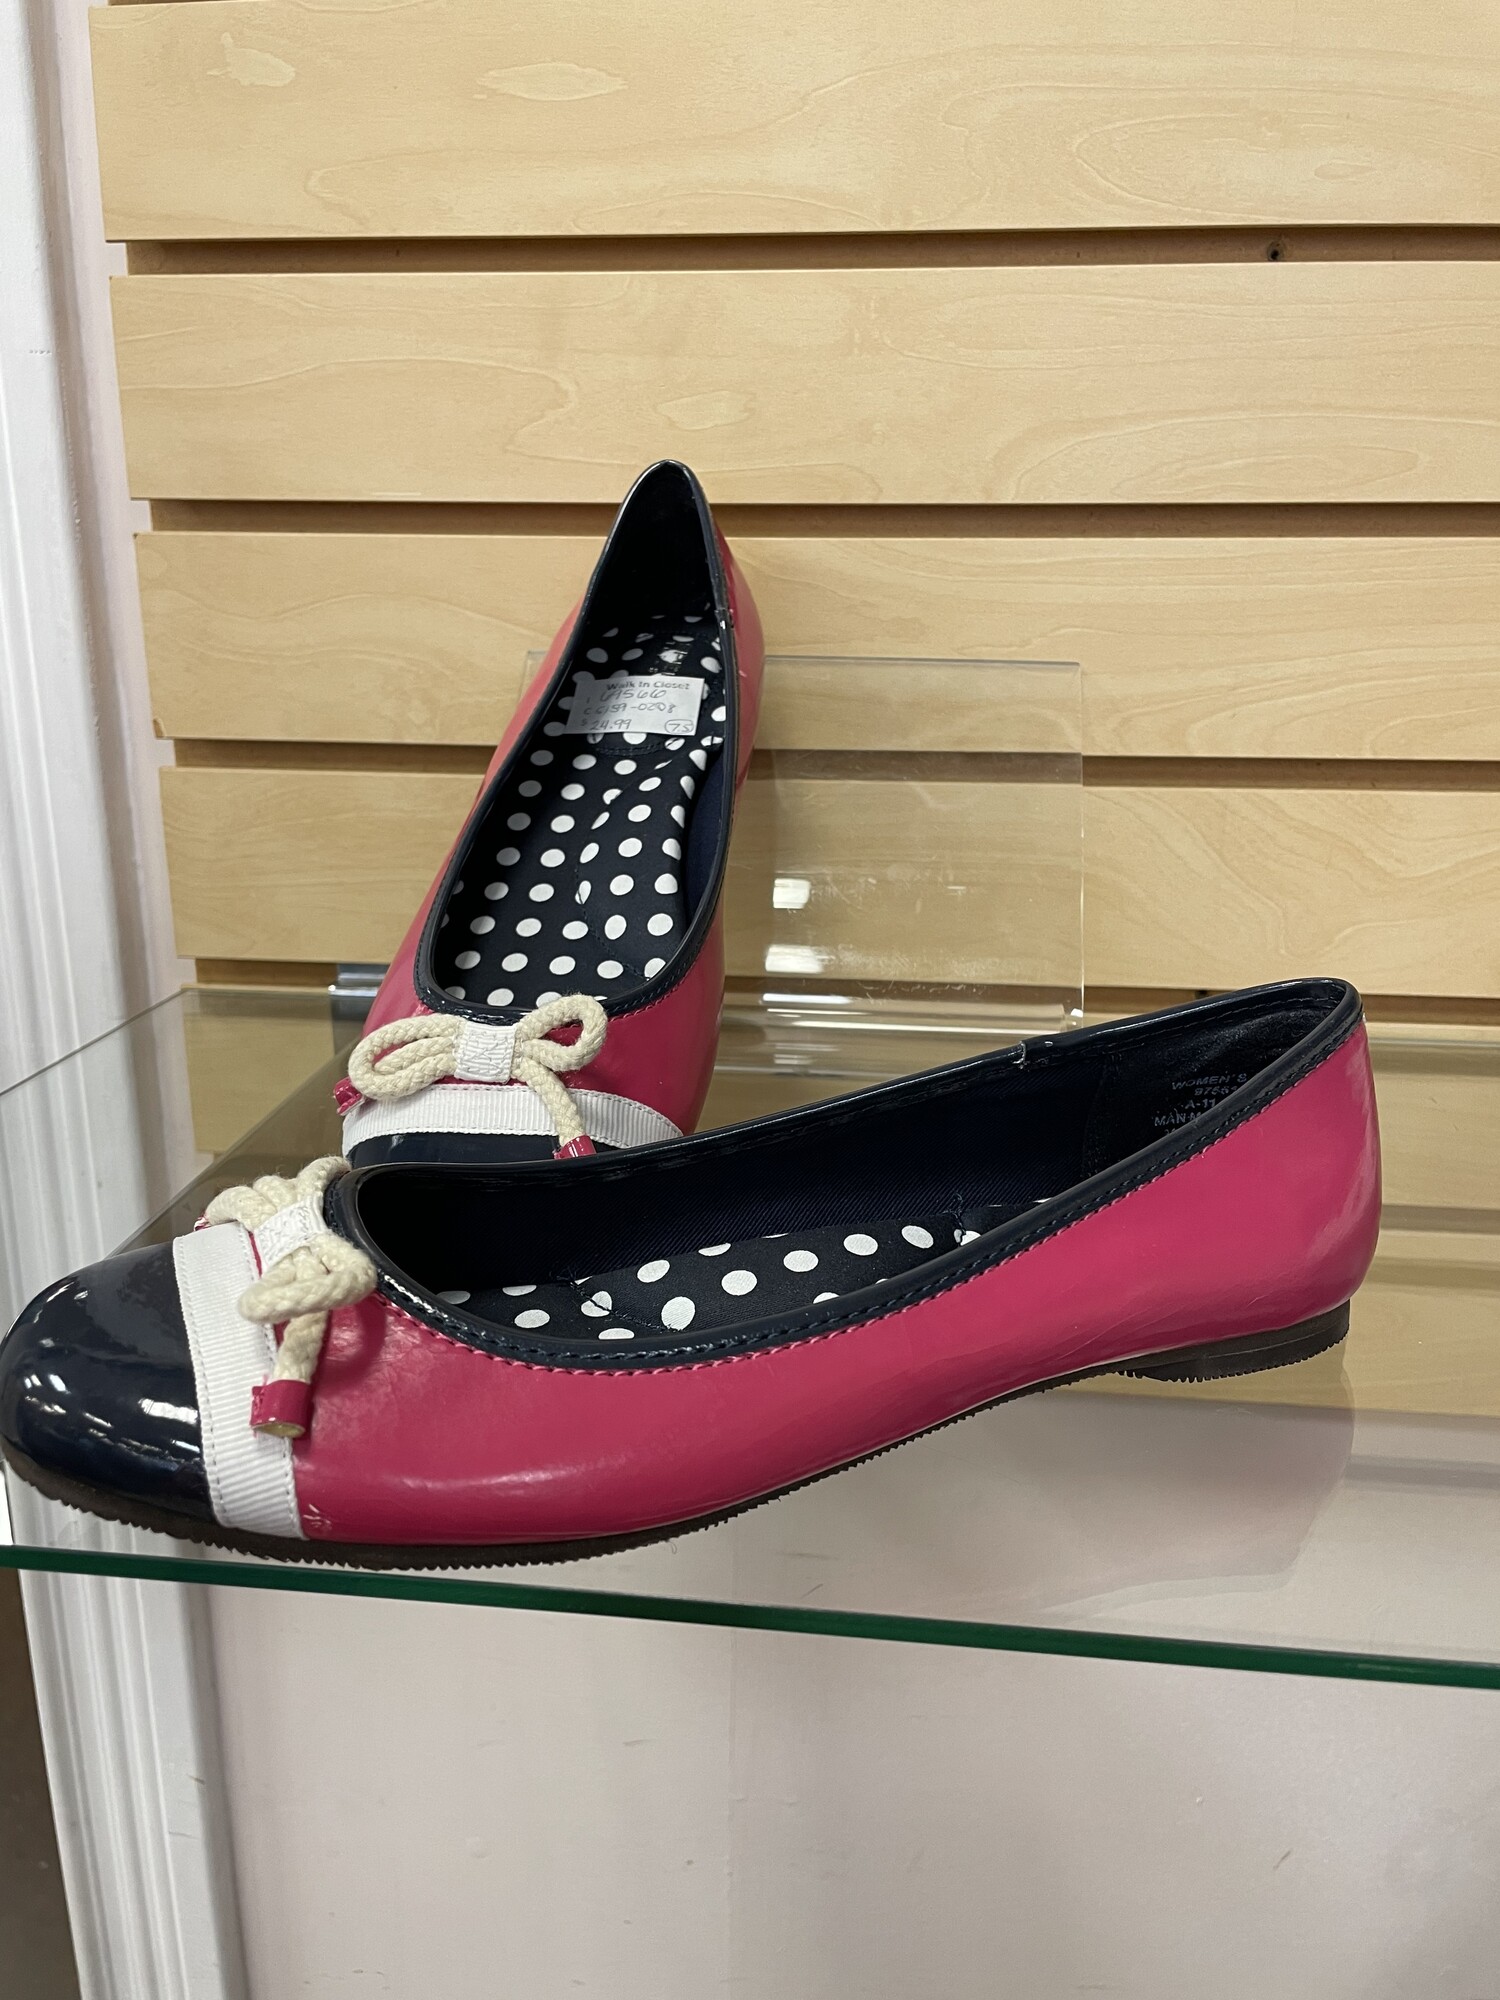 New Sperry Ballet Flats, Hot Pink and Navy, Size: 7.5